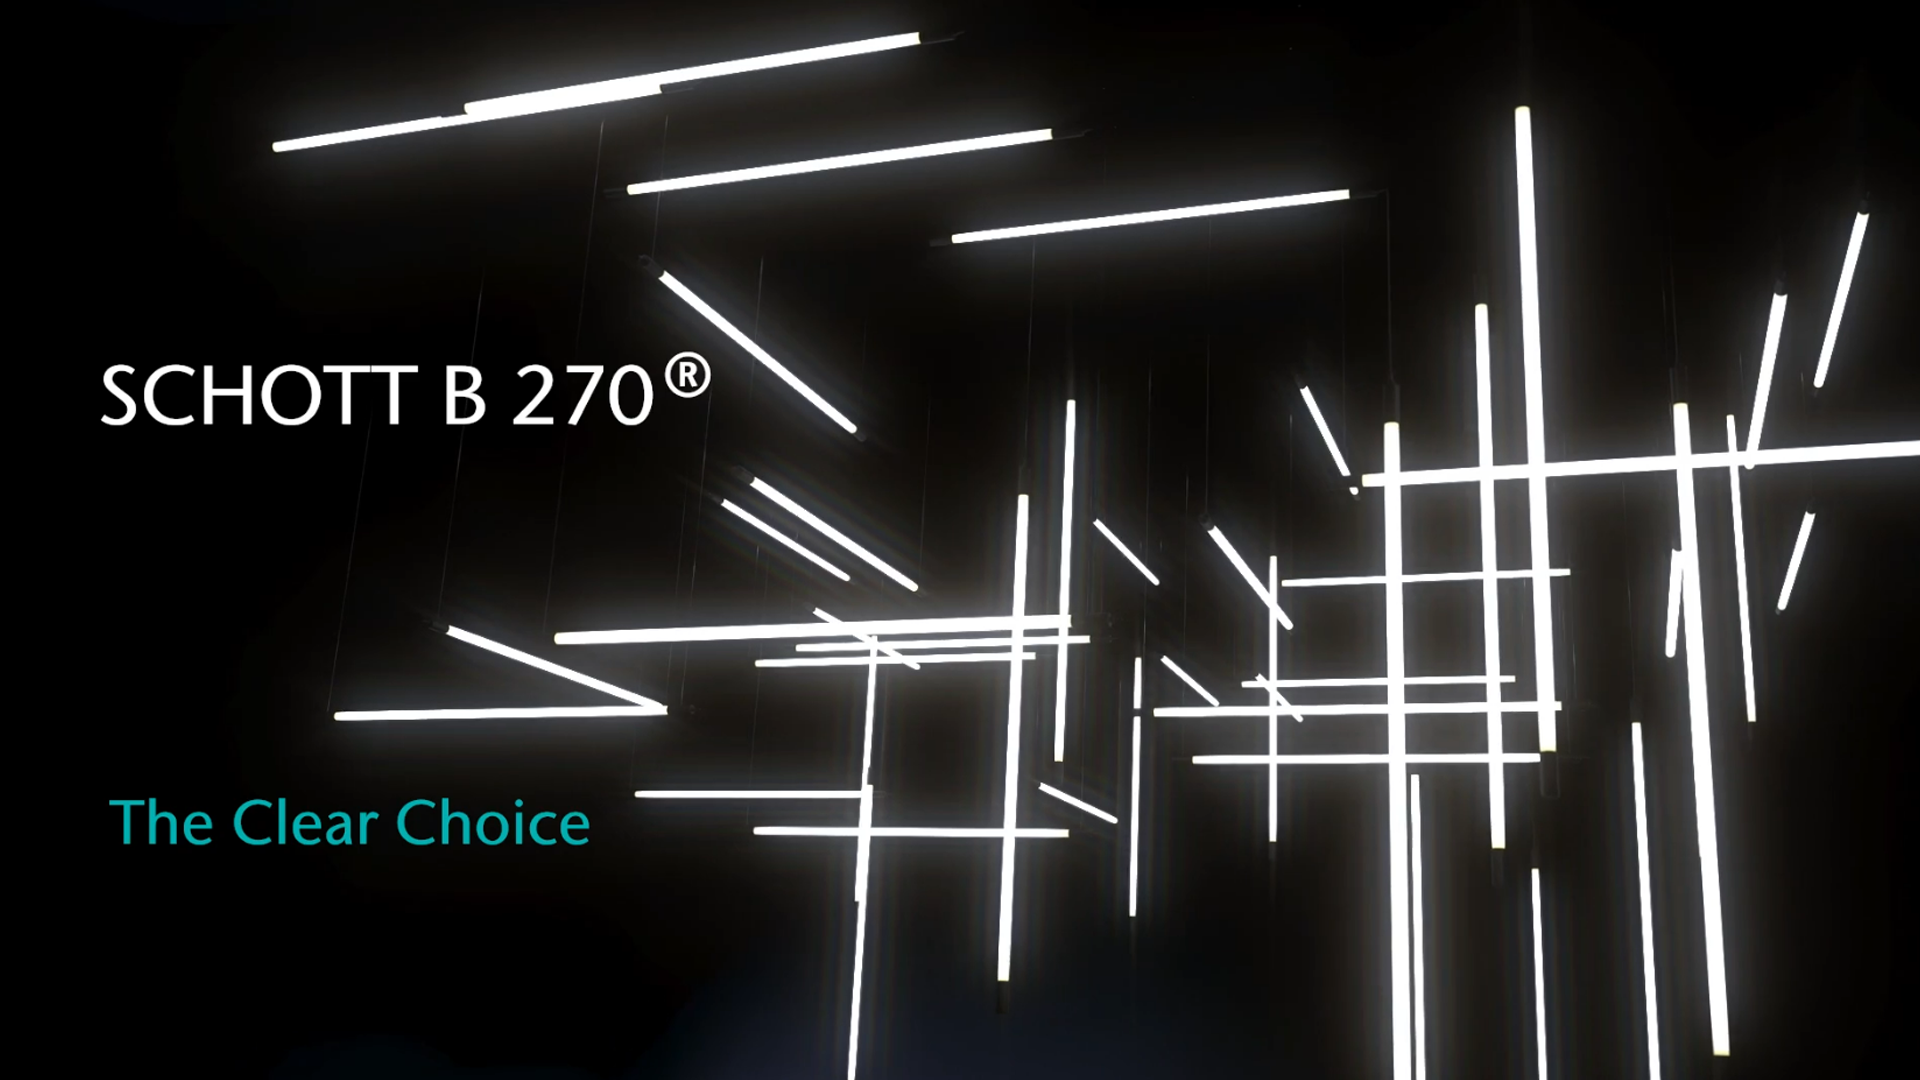 A lot of white fluorescent tubes floating on different levels at right angles to each other in a dark room. In front of it is a hovering text: “SCHOTT B 270® - The clear choice.